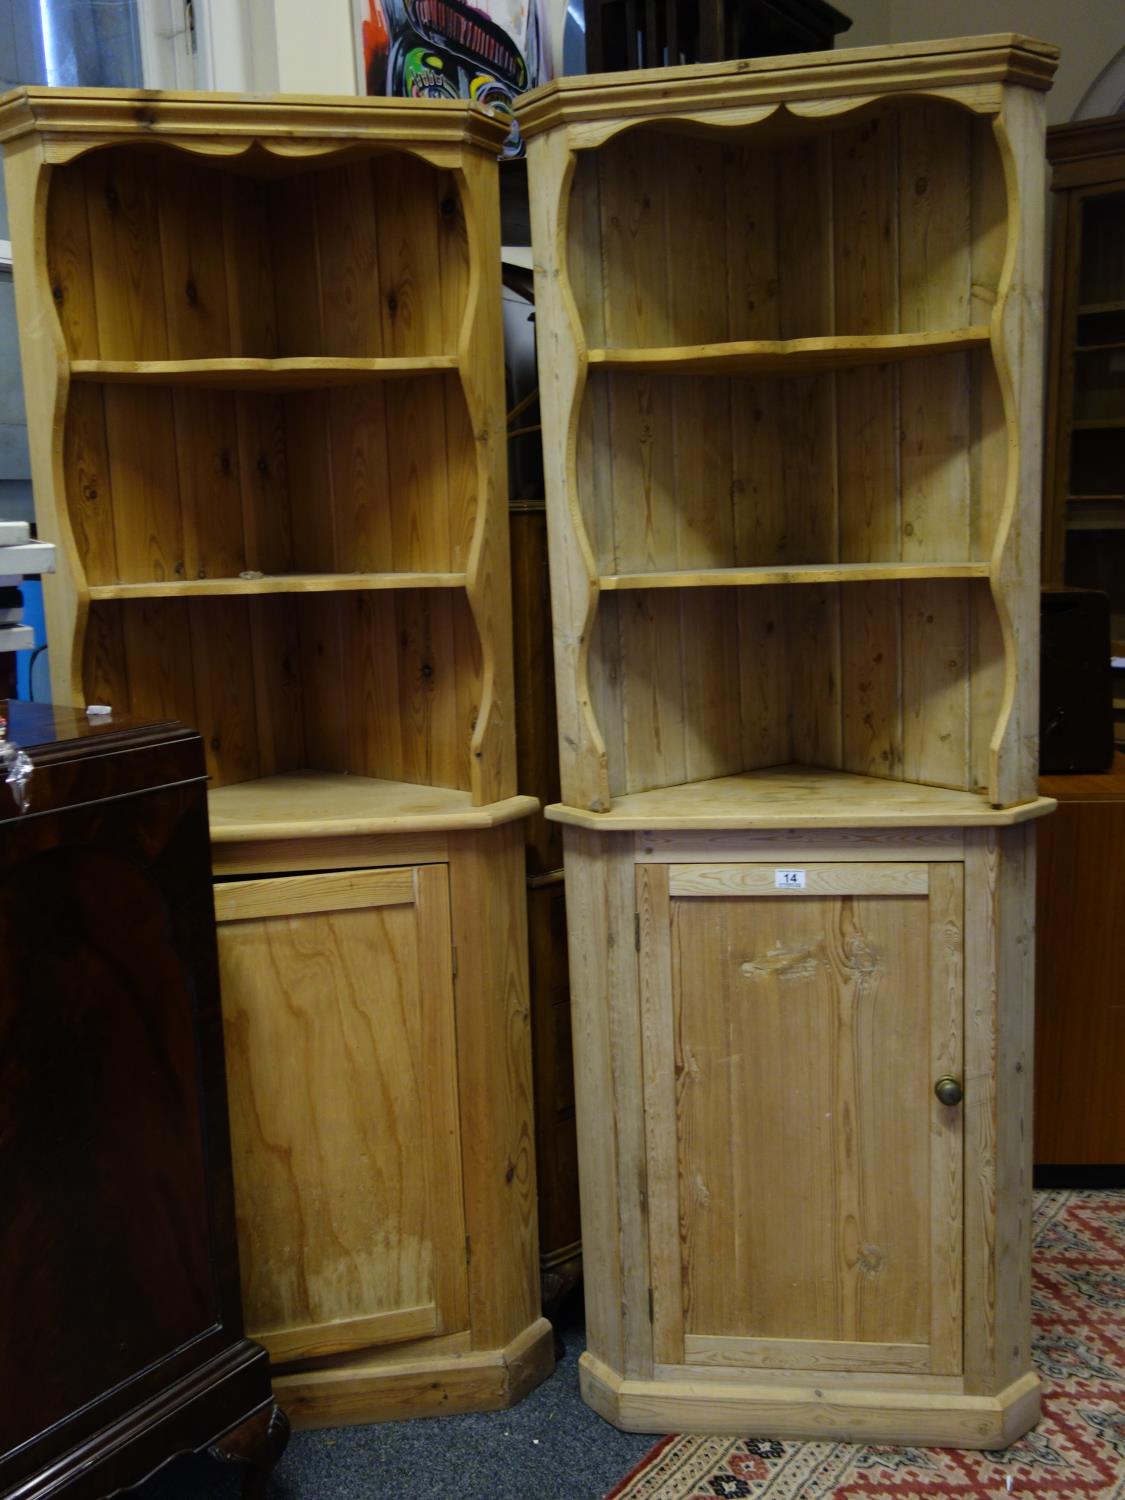 2 x similar stripped pine corner units each on 6' tall containing 3 shelves to the top section above